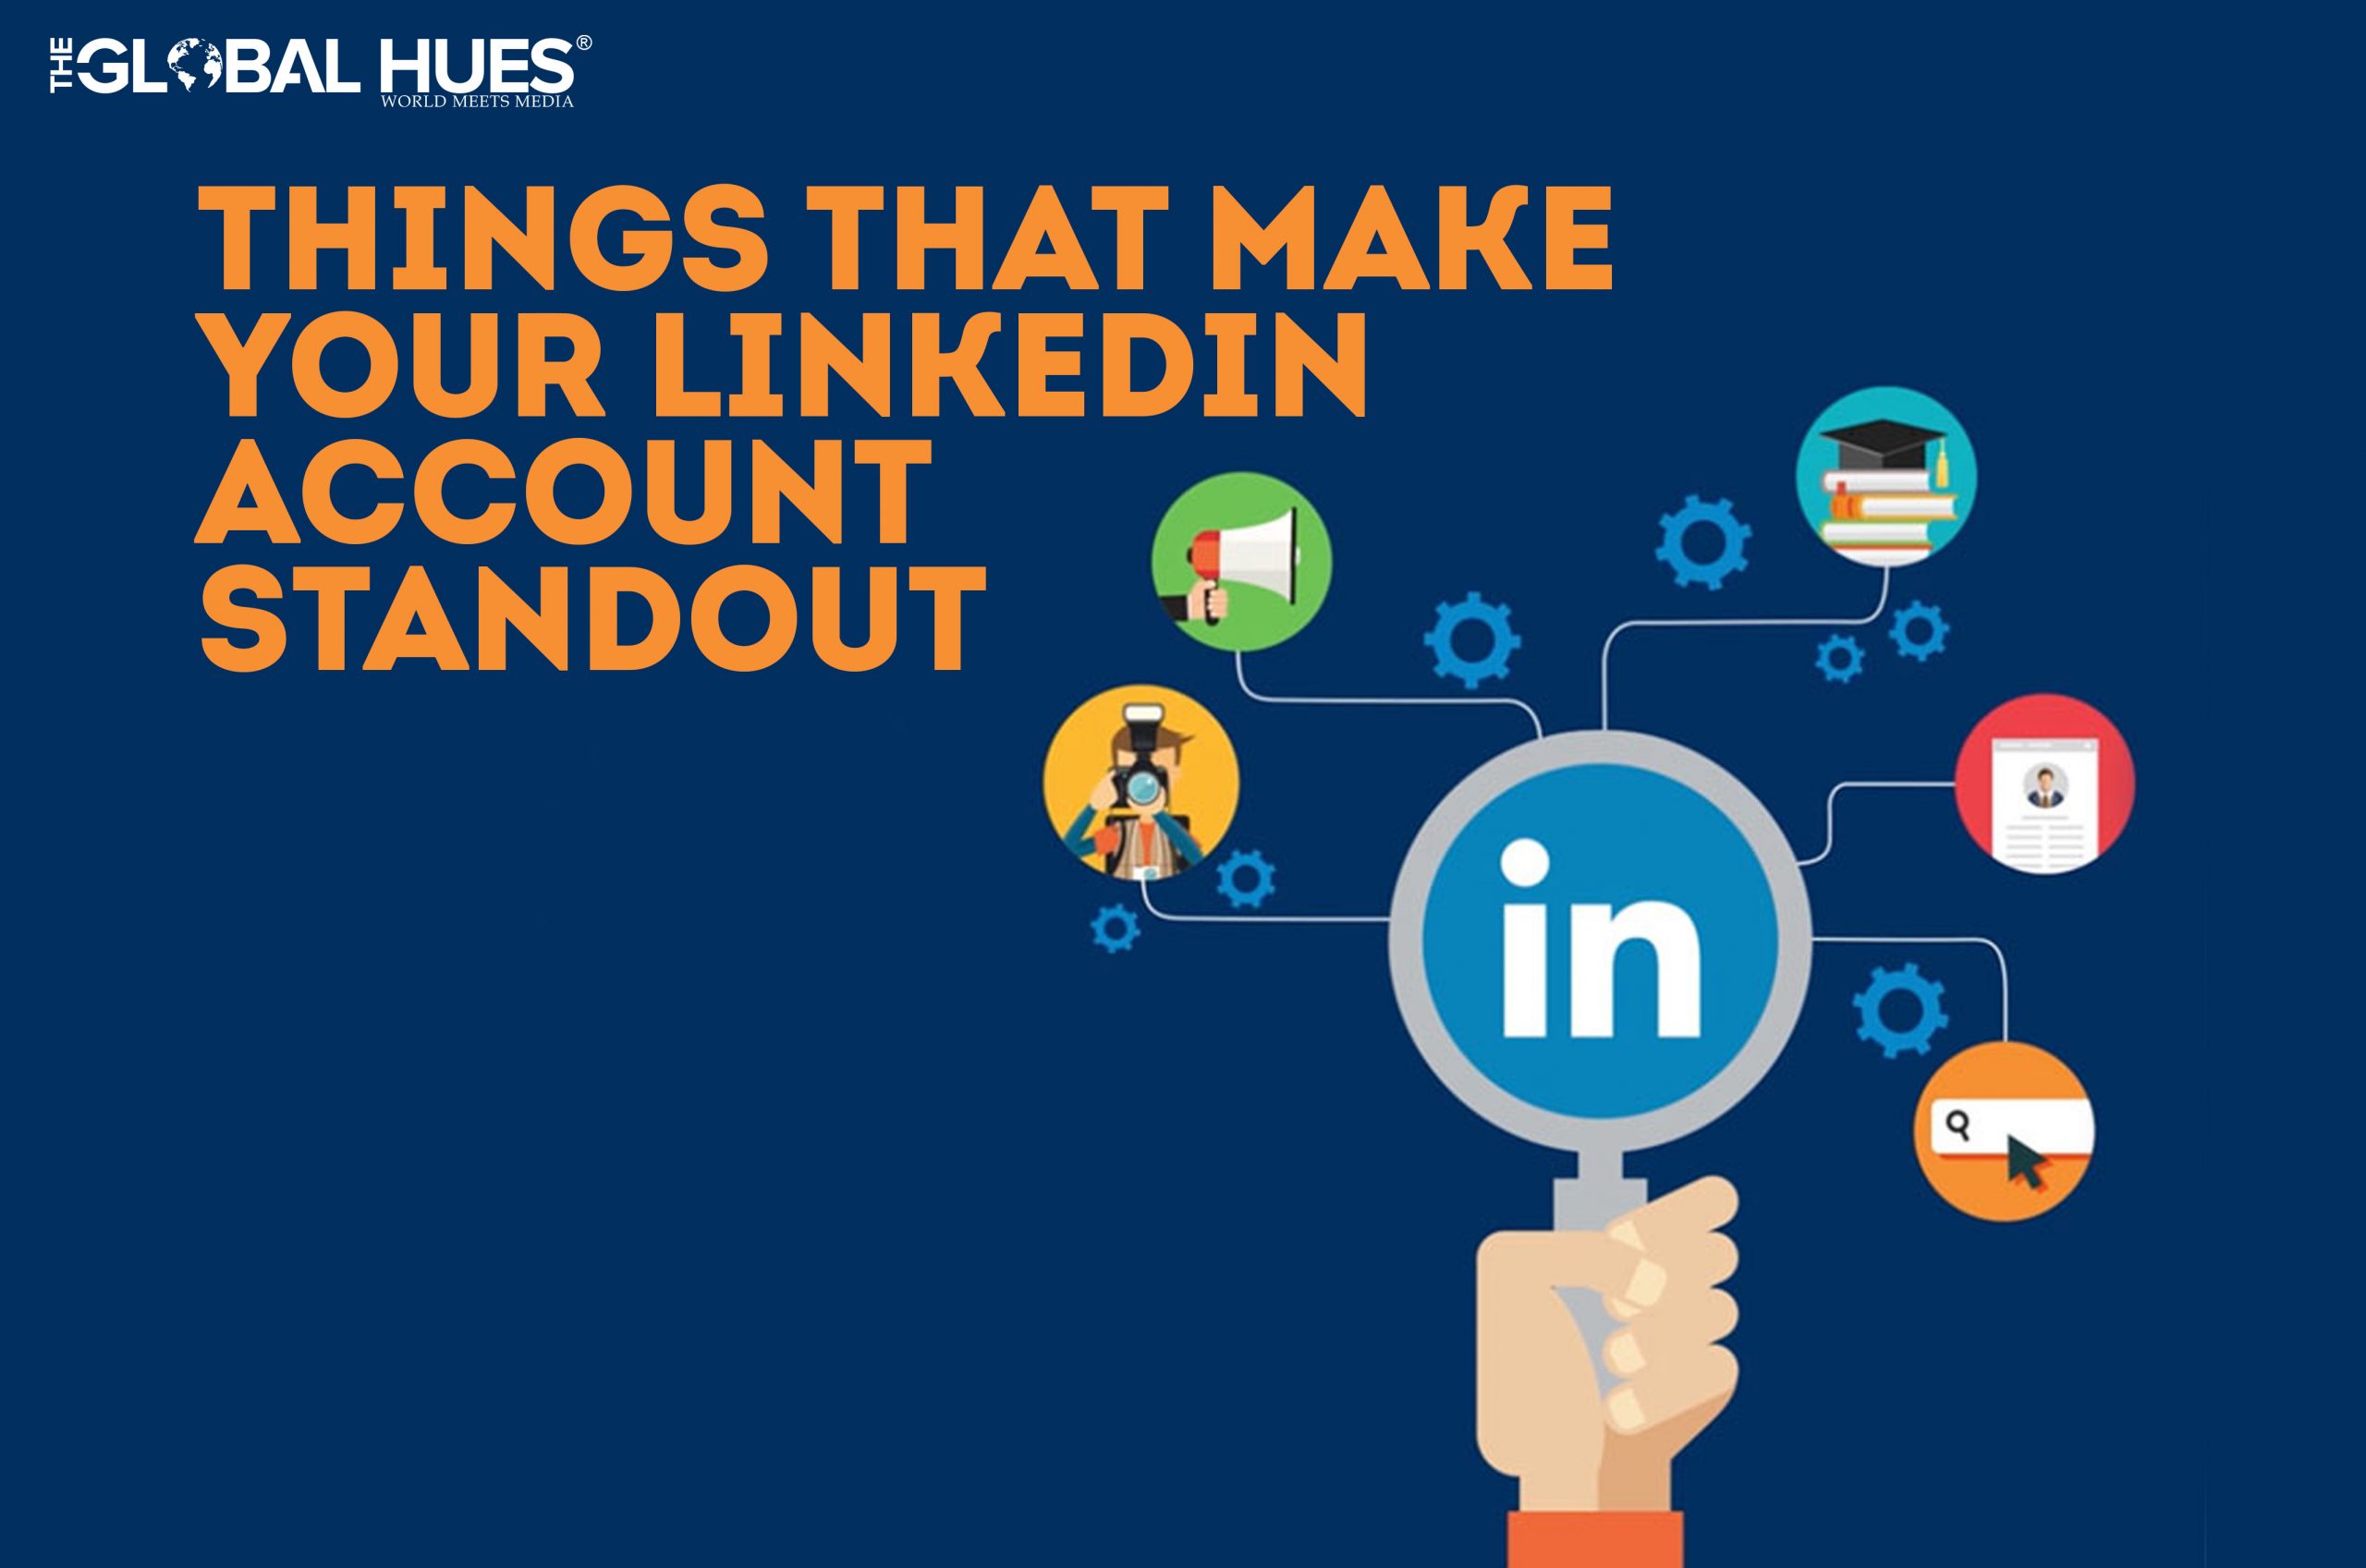 Thinks that make your LinkedIn account standout